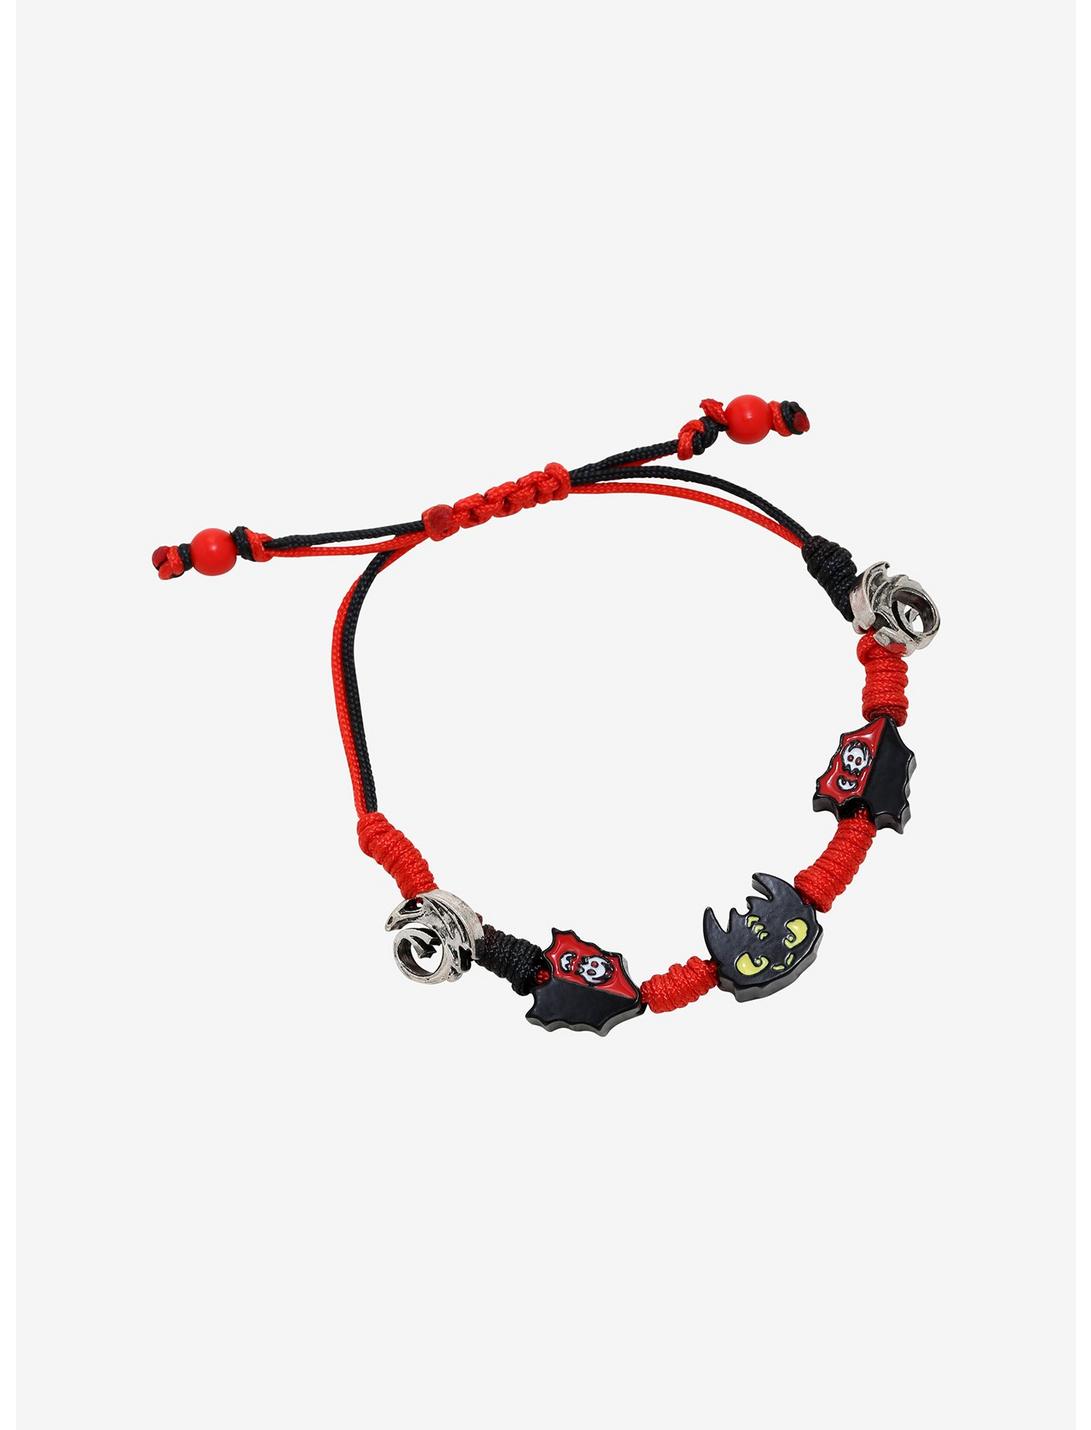 How To Train Your Dragon Toothless Cord Bracelet, , hi-res